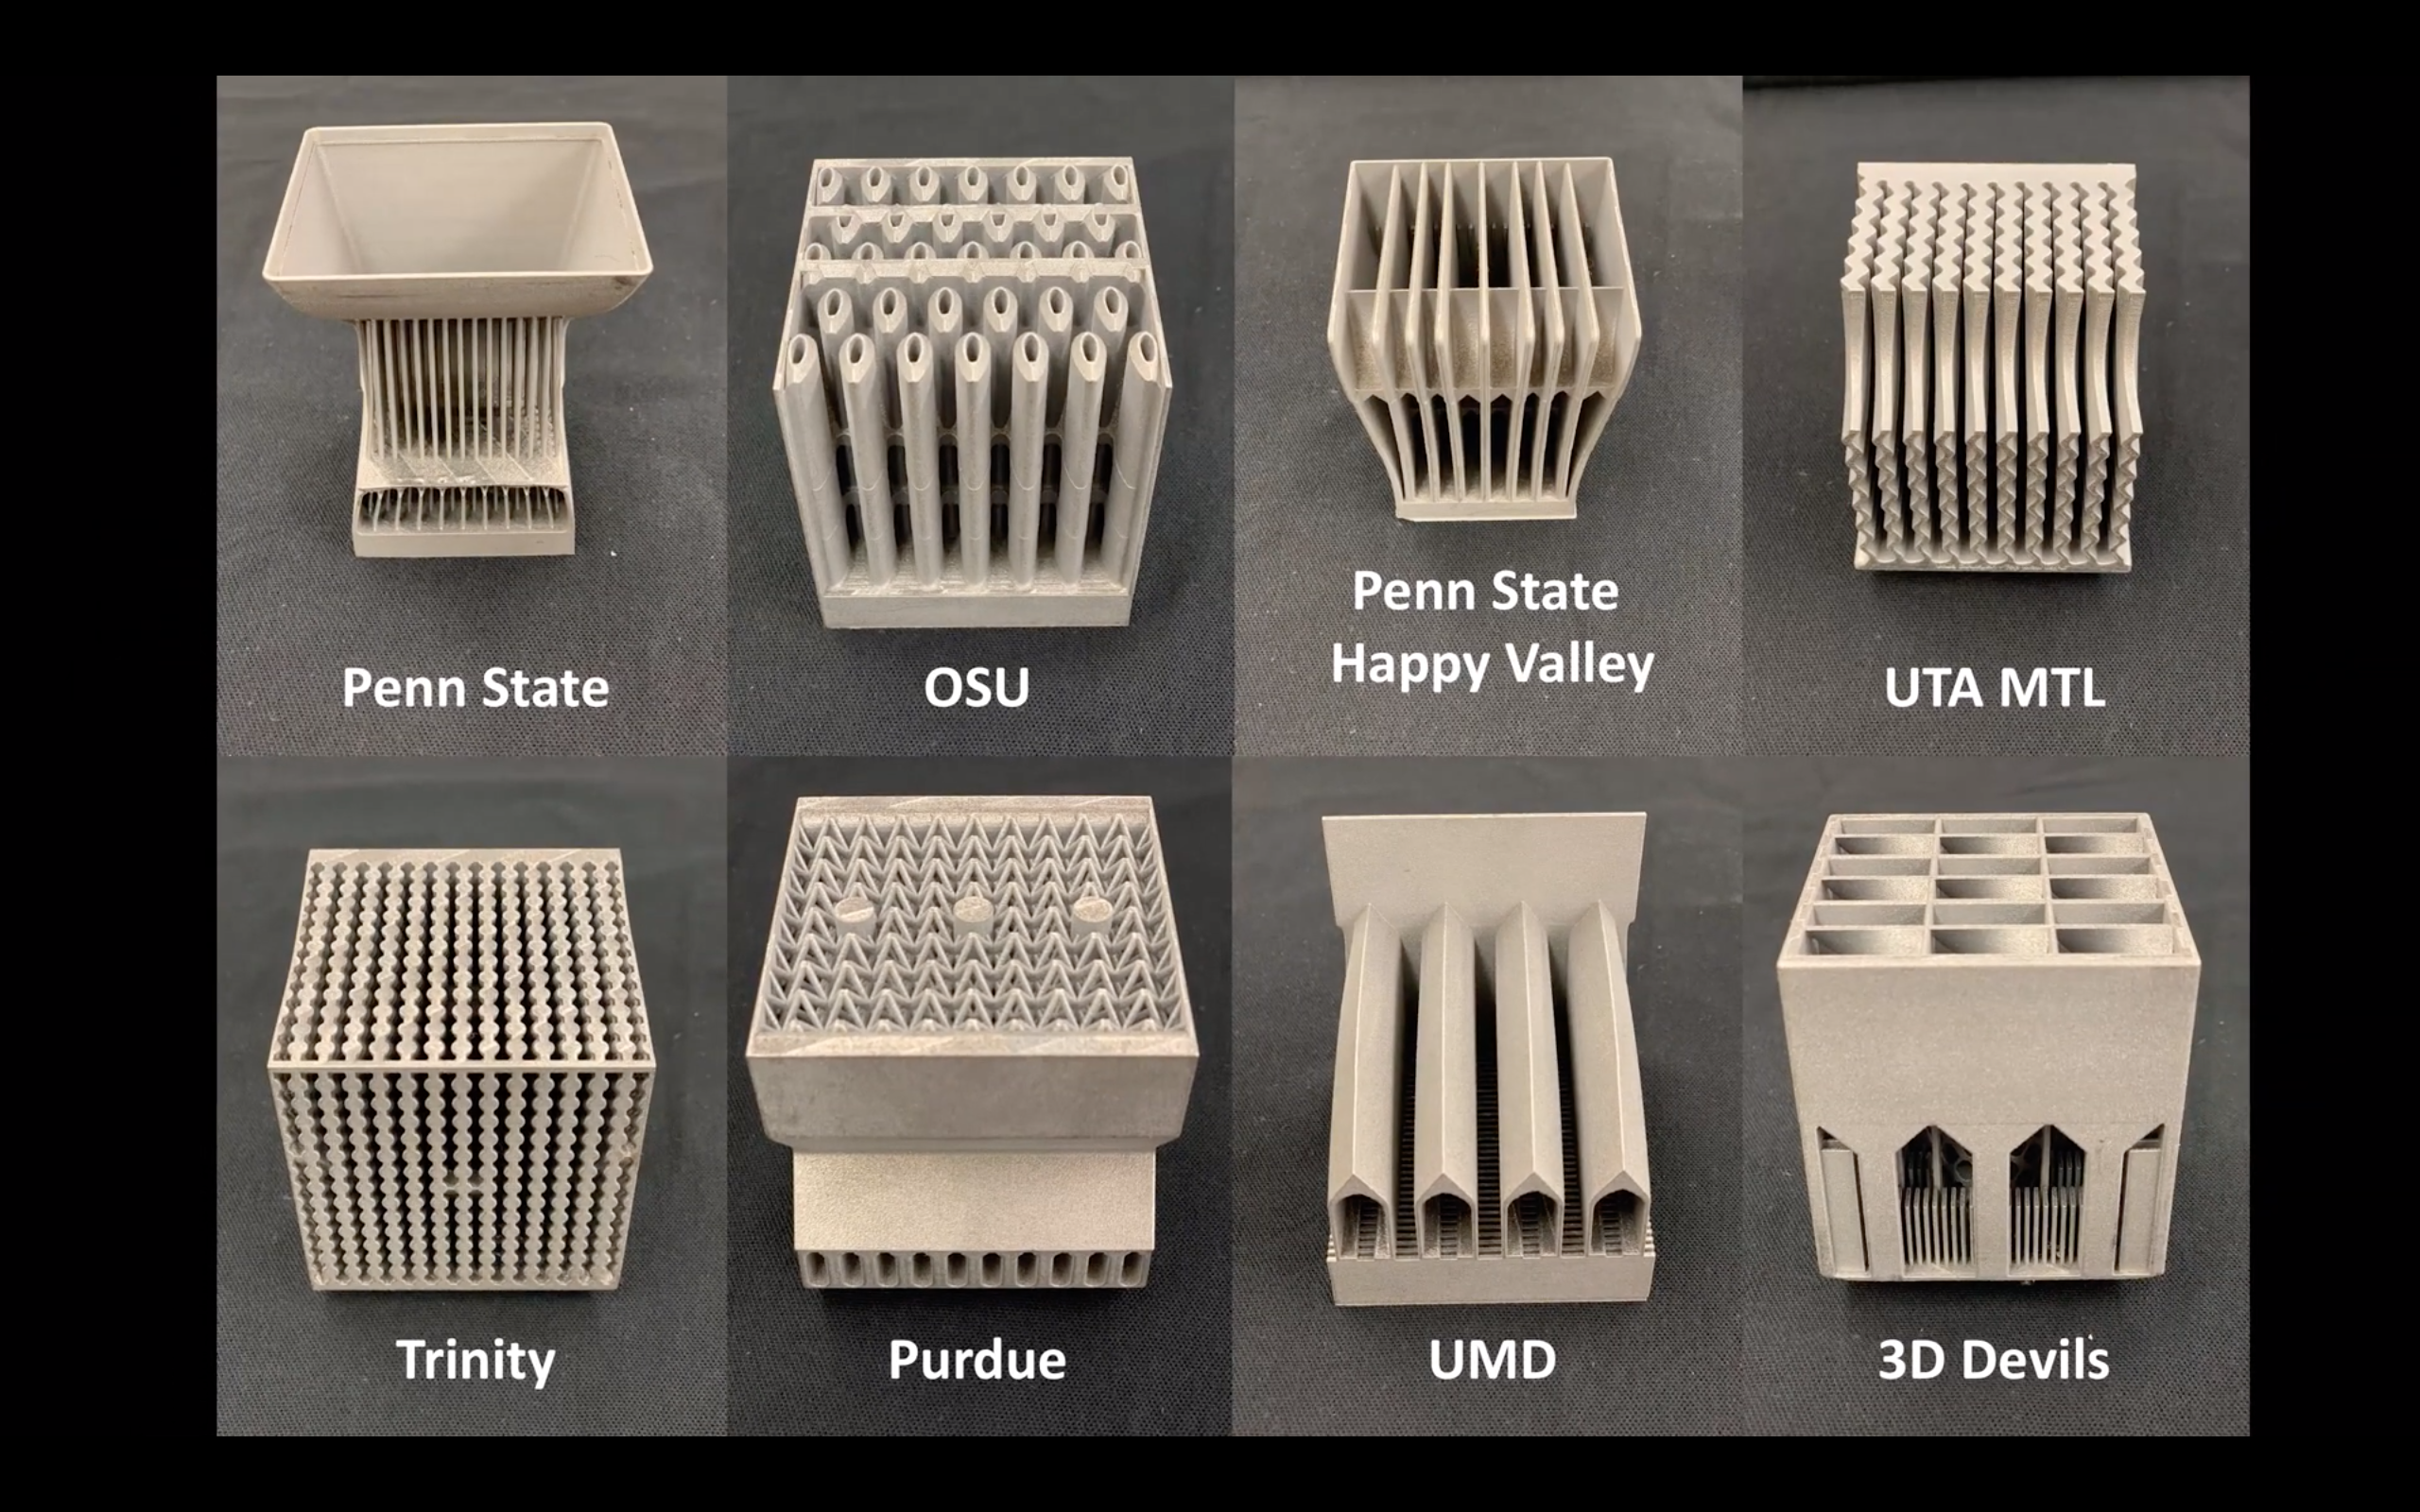 Entries to the GE sponsored heat-sink design competition. Image via Purdue University